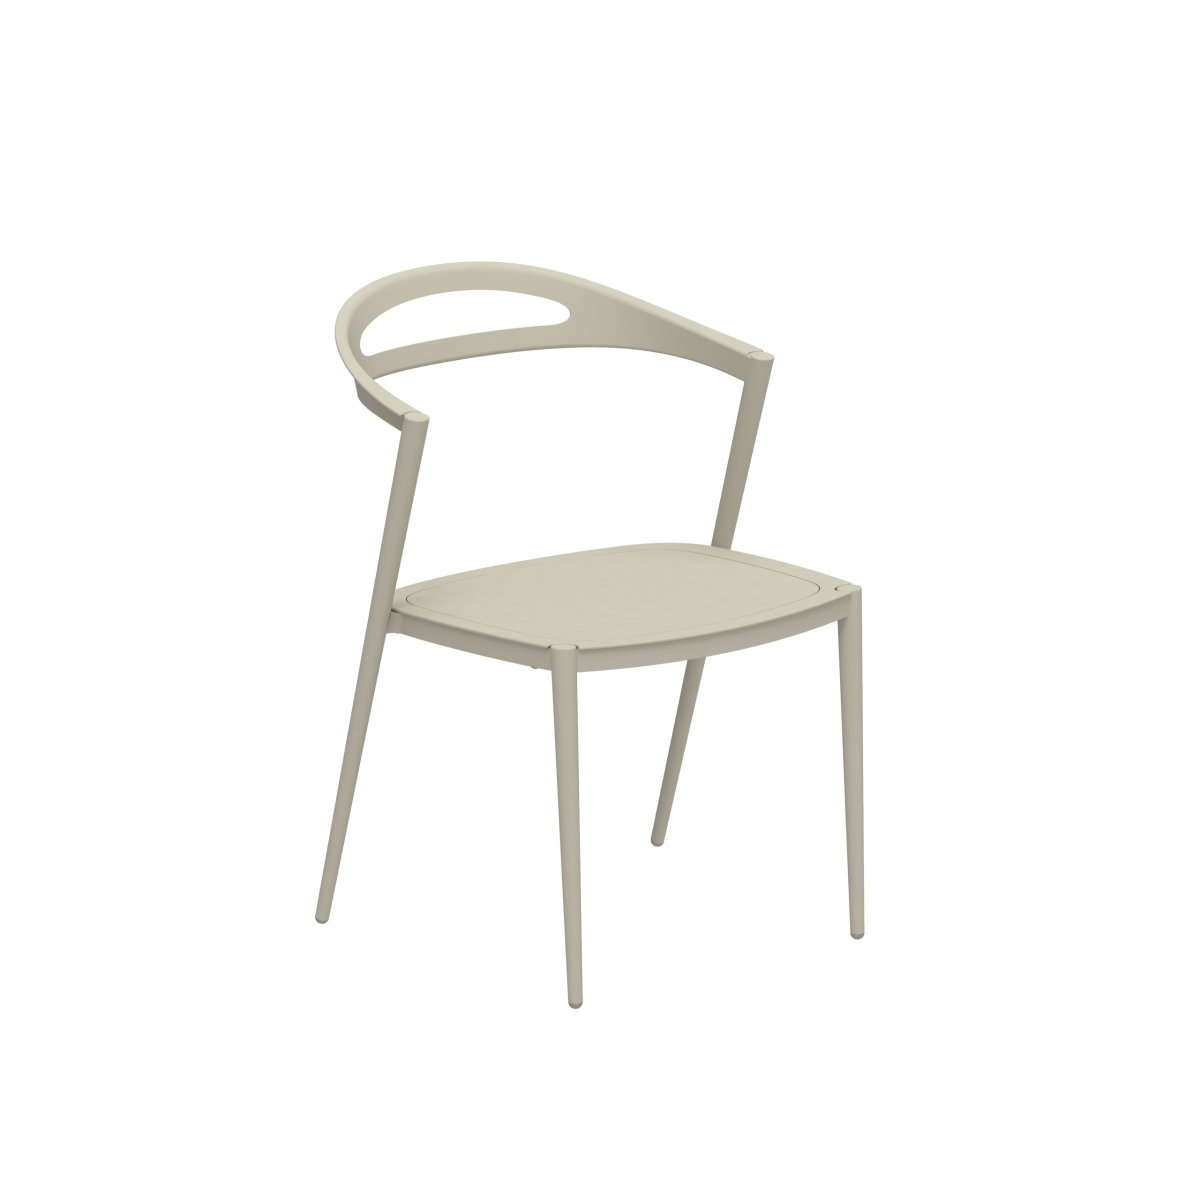 Styletto 55 Dining Chair